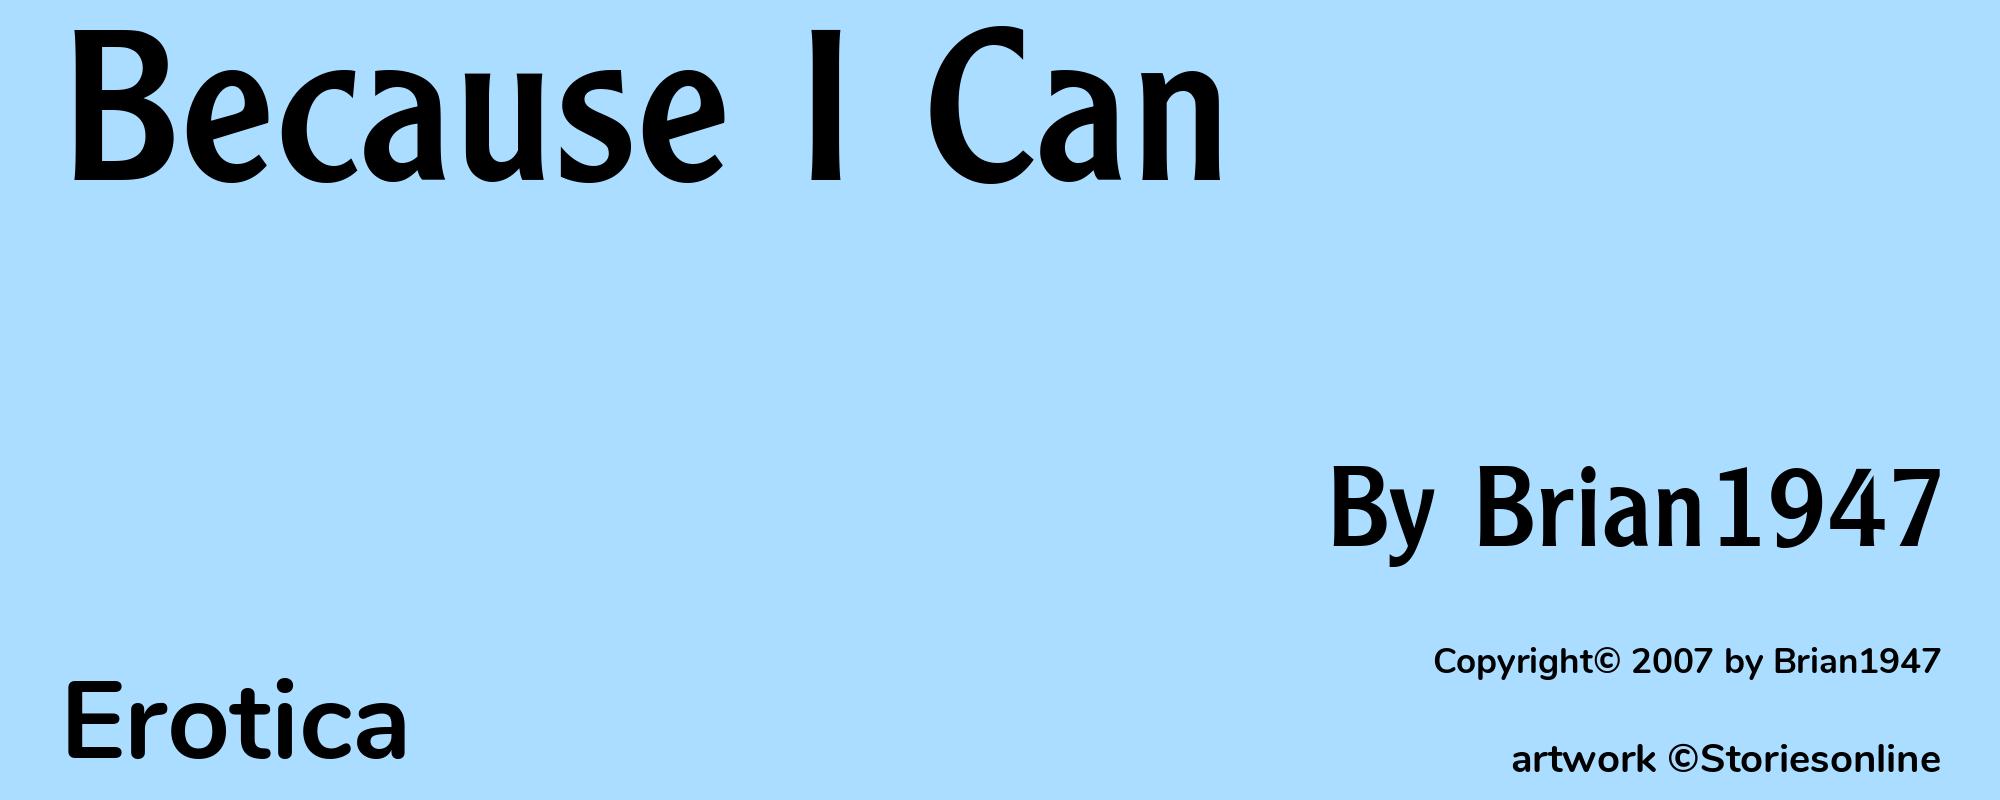 Because I Can - Cover